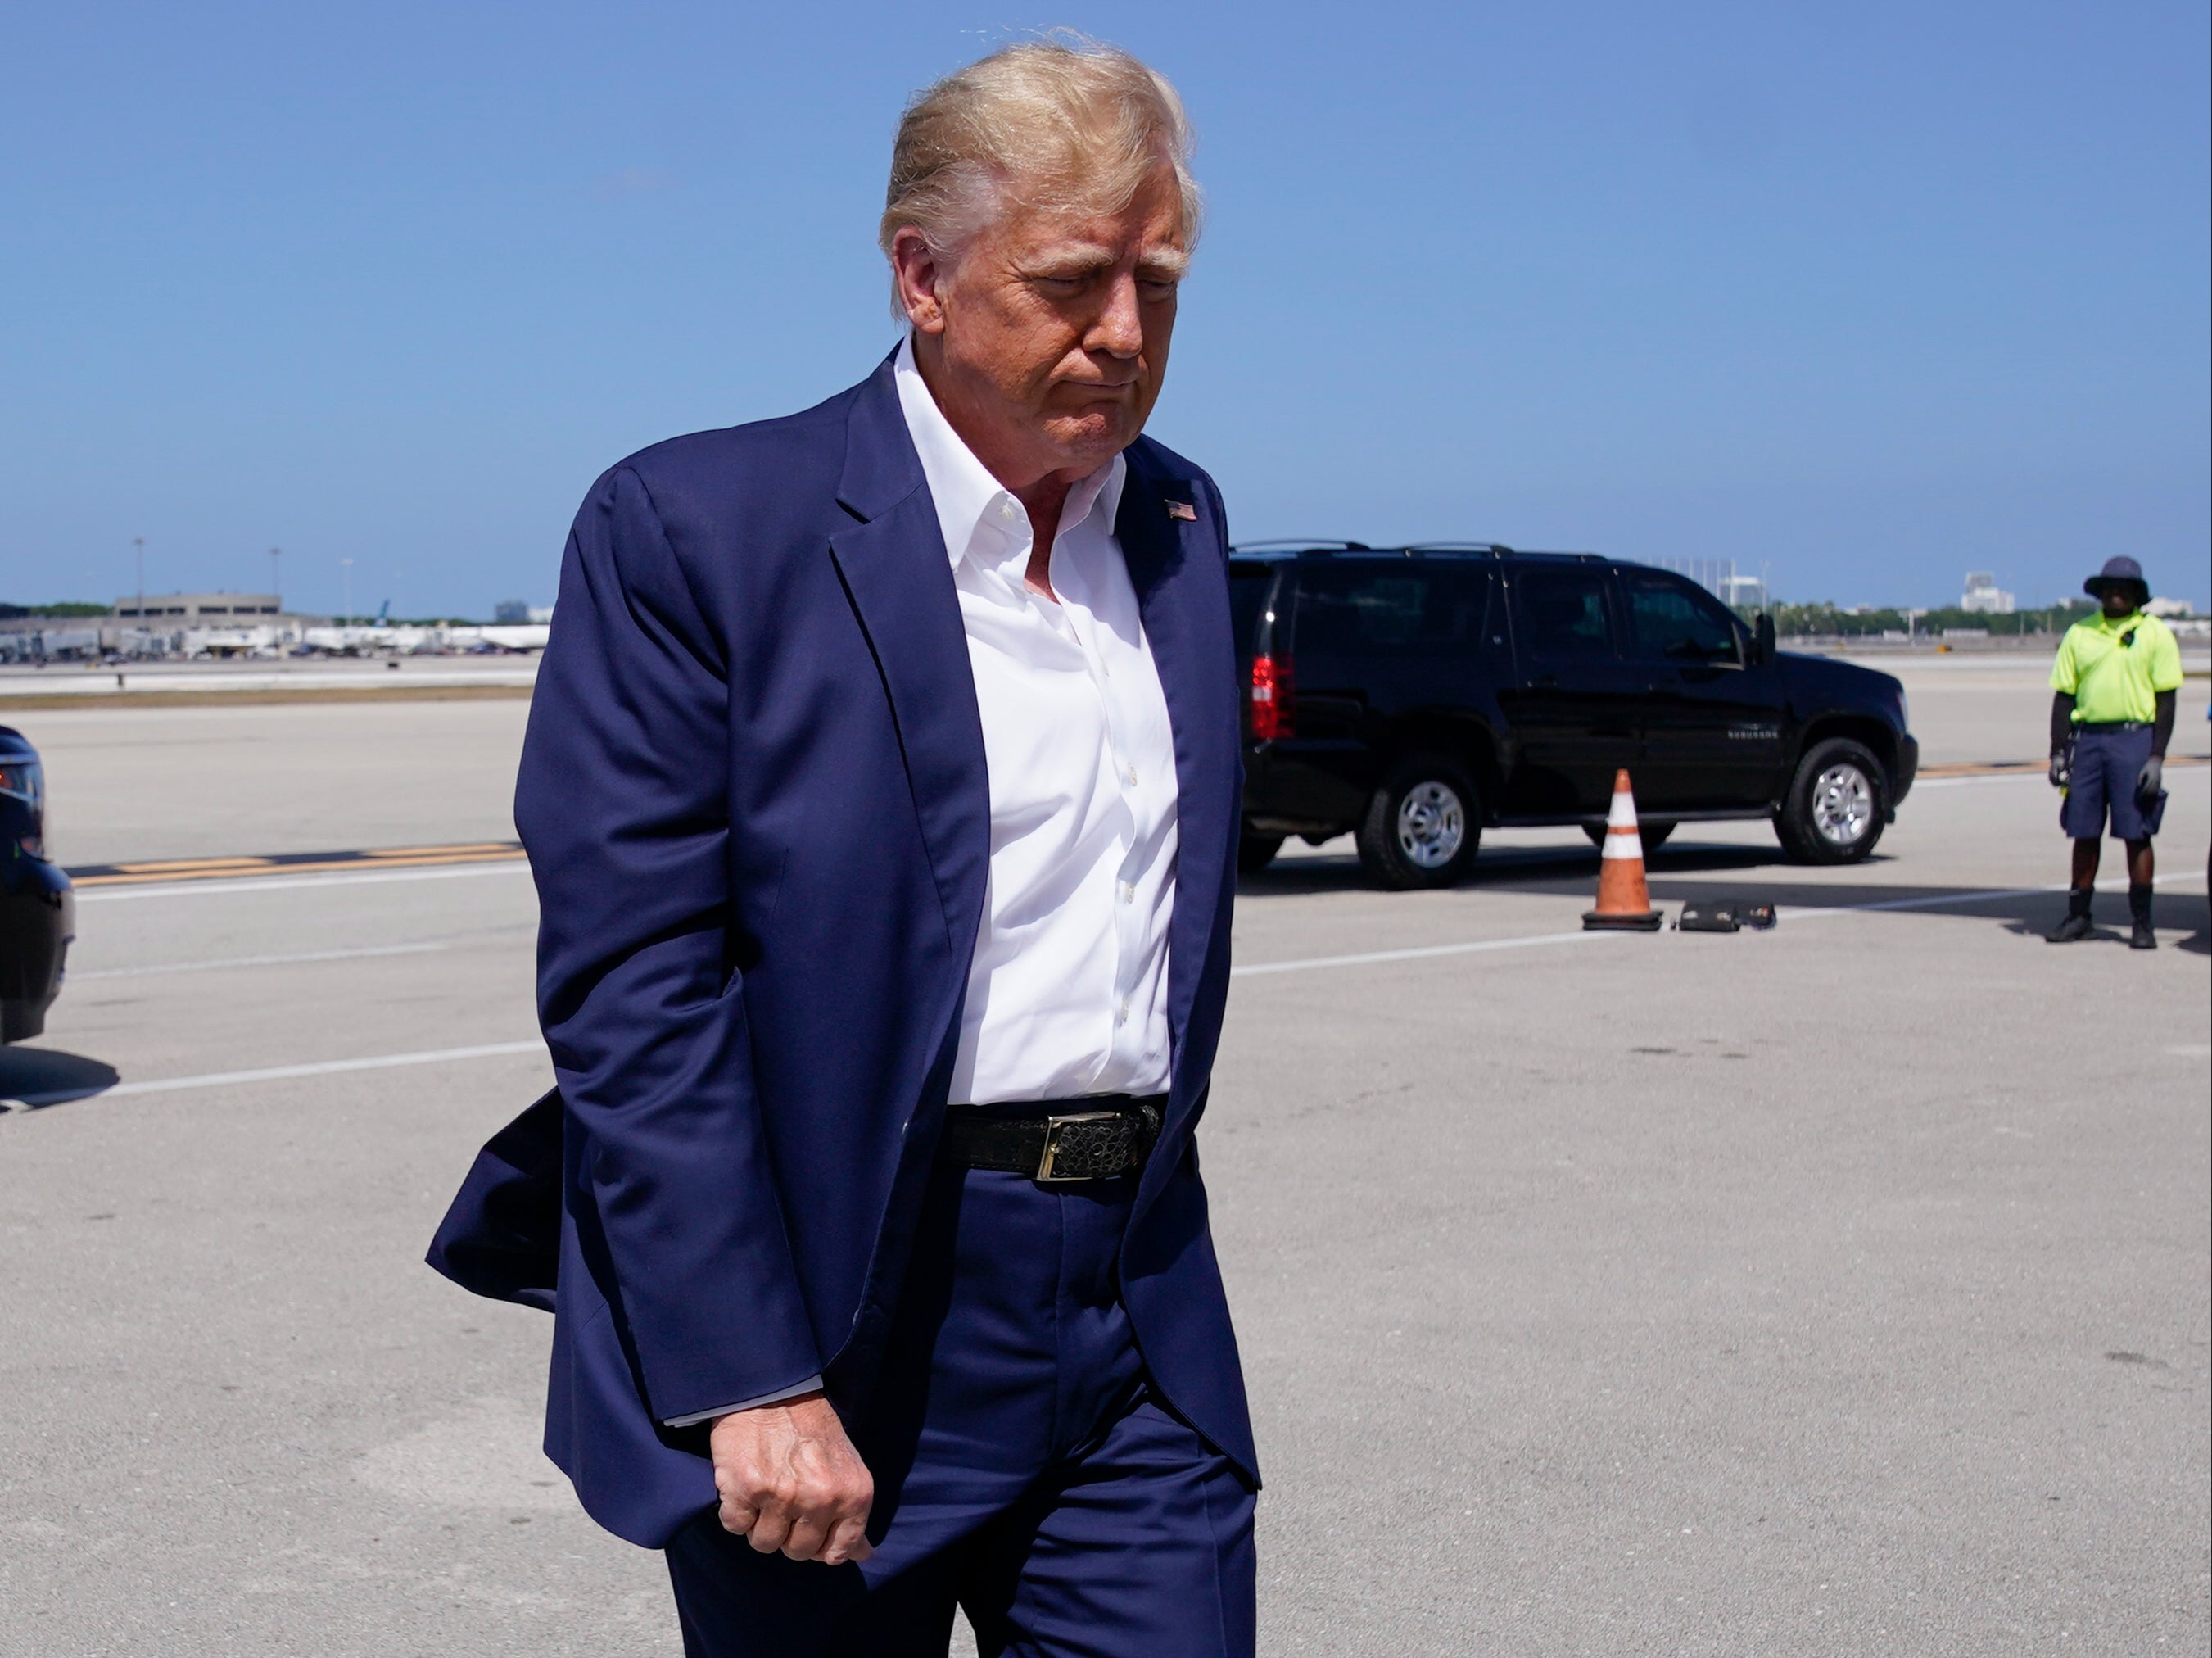 Trump pictured boarding his plane in Florida before flying to Waco